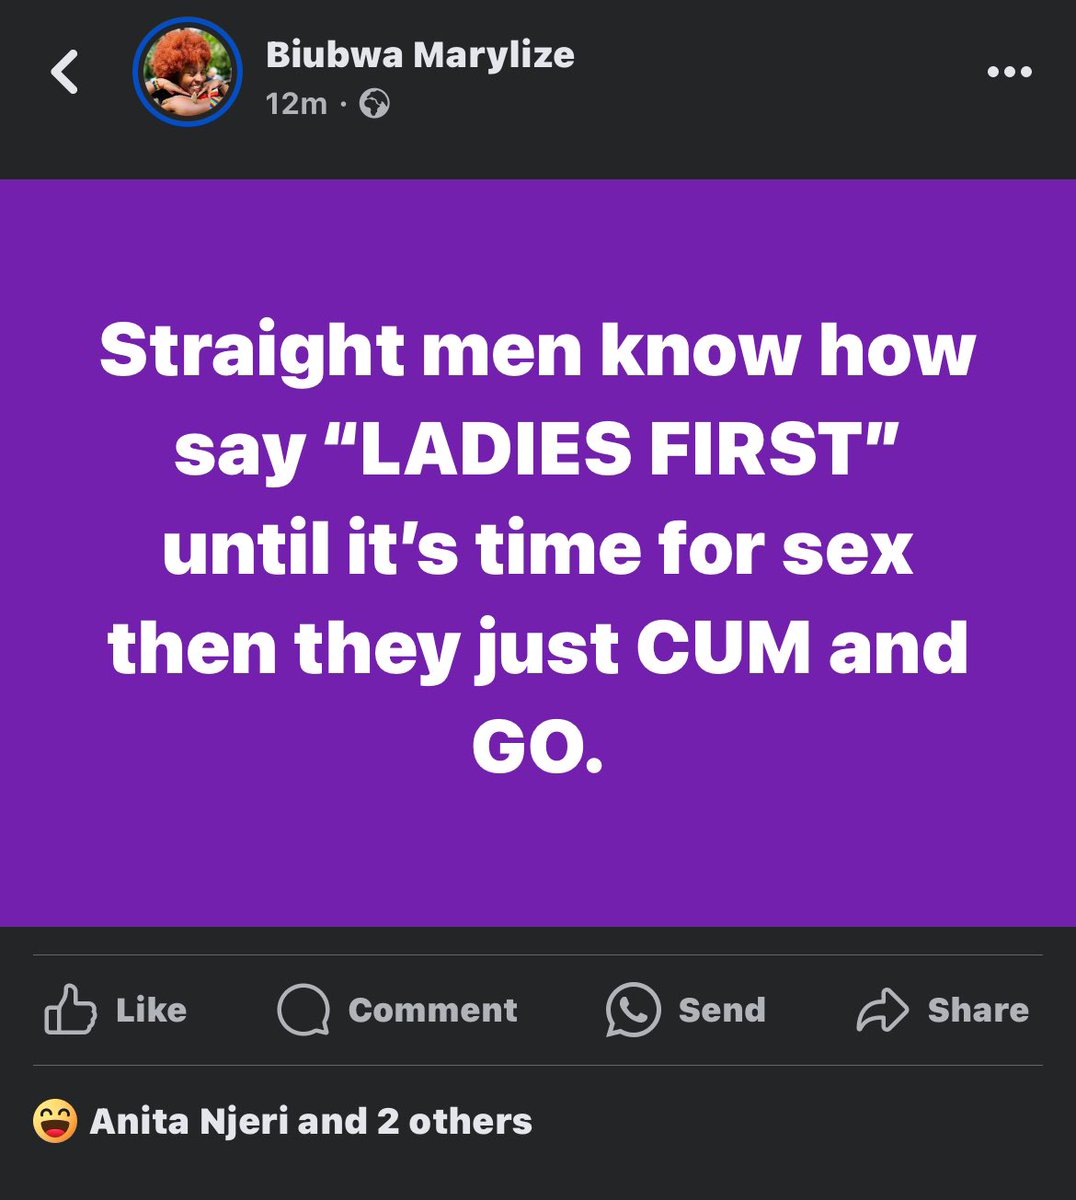 Straight men know how to say “LADIES FIRST” until it’s time for sex then they just CUM and GO.